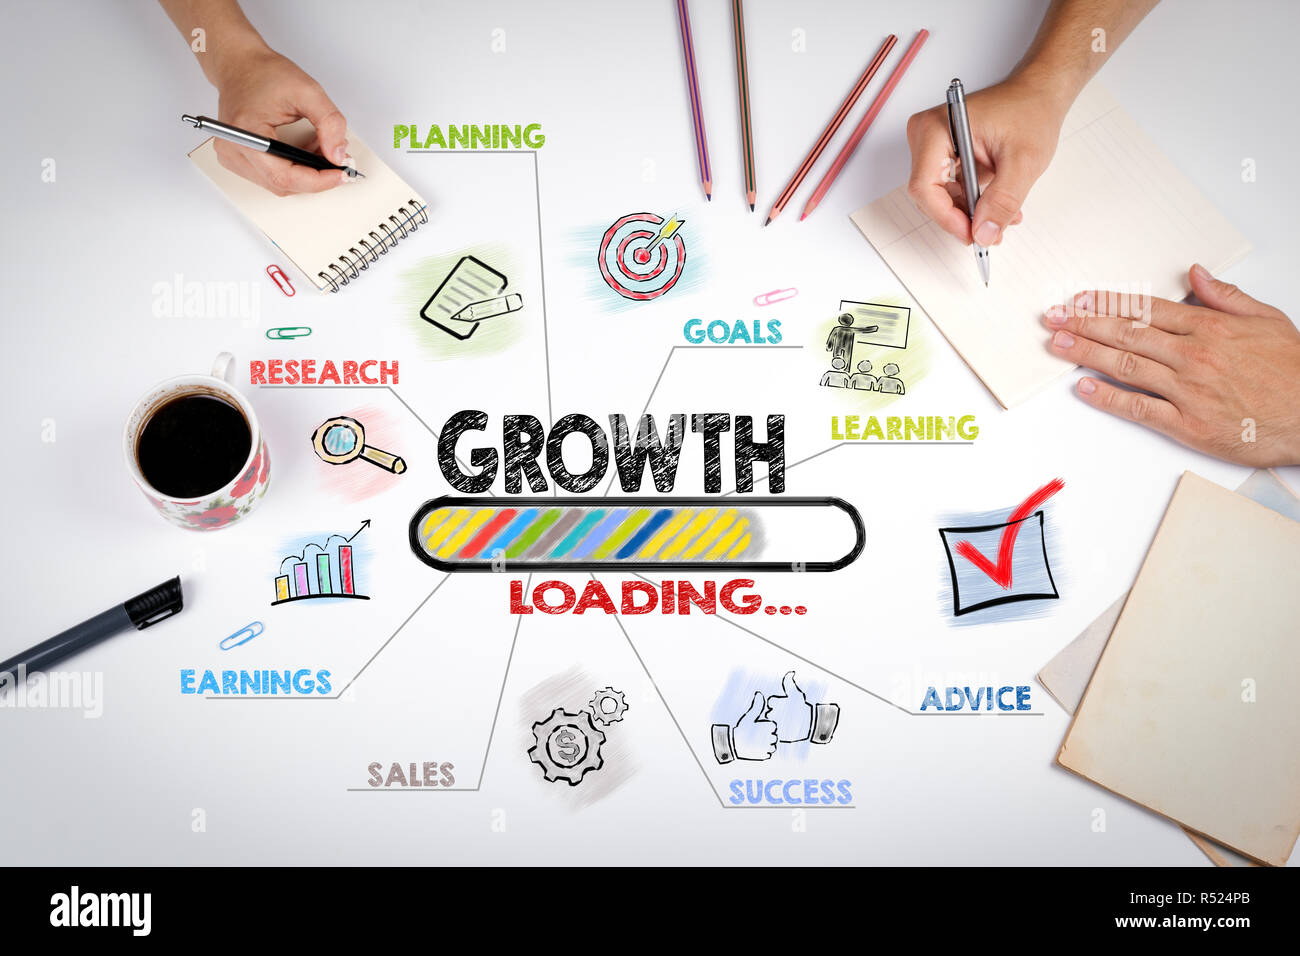 Growth,  Business  Concept. Chart with keywords and icons Stock Photo